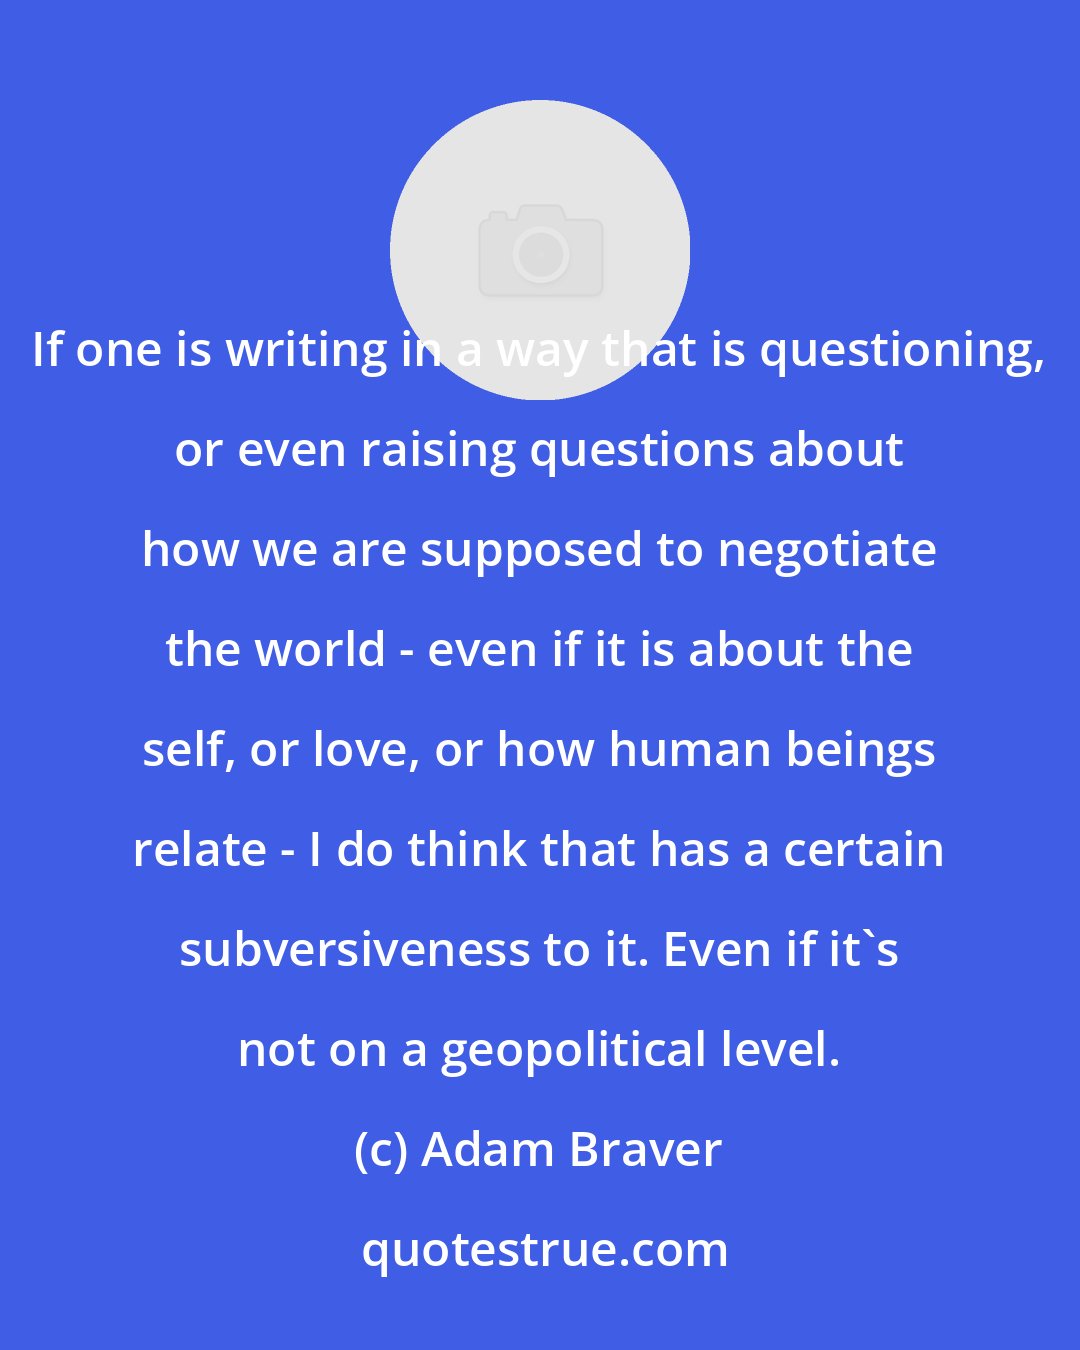 Adam Braver: If one is writing in a way that is questioning, or even raising questions about how we are supposed to negotiate the world - even if it is about the self, or love, or how human beings relate - I do think that has a certain subversiveness to it. Even if it's not on a geopolitical level.